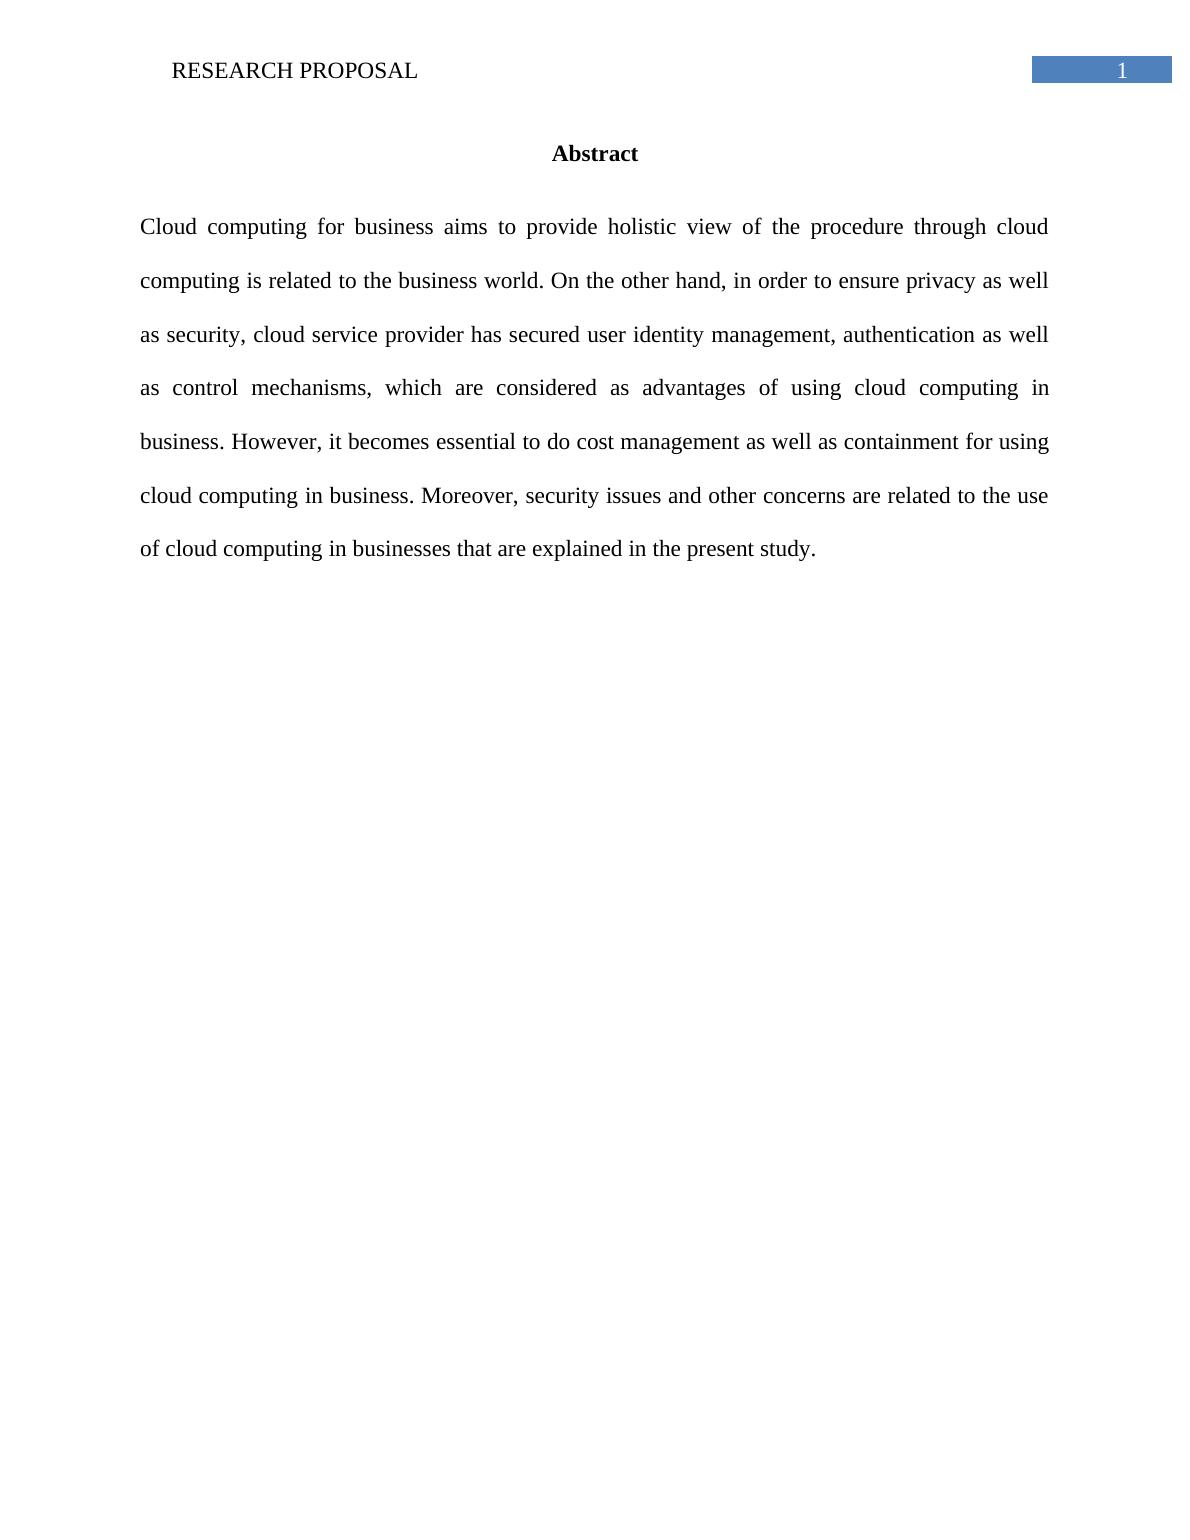 ITN 263 - Research Proposal on Advantages and Disadvantages of Cloud Computing for Businesses_2